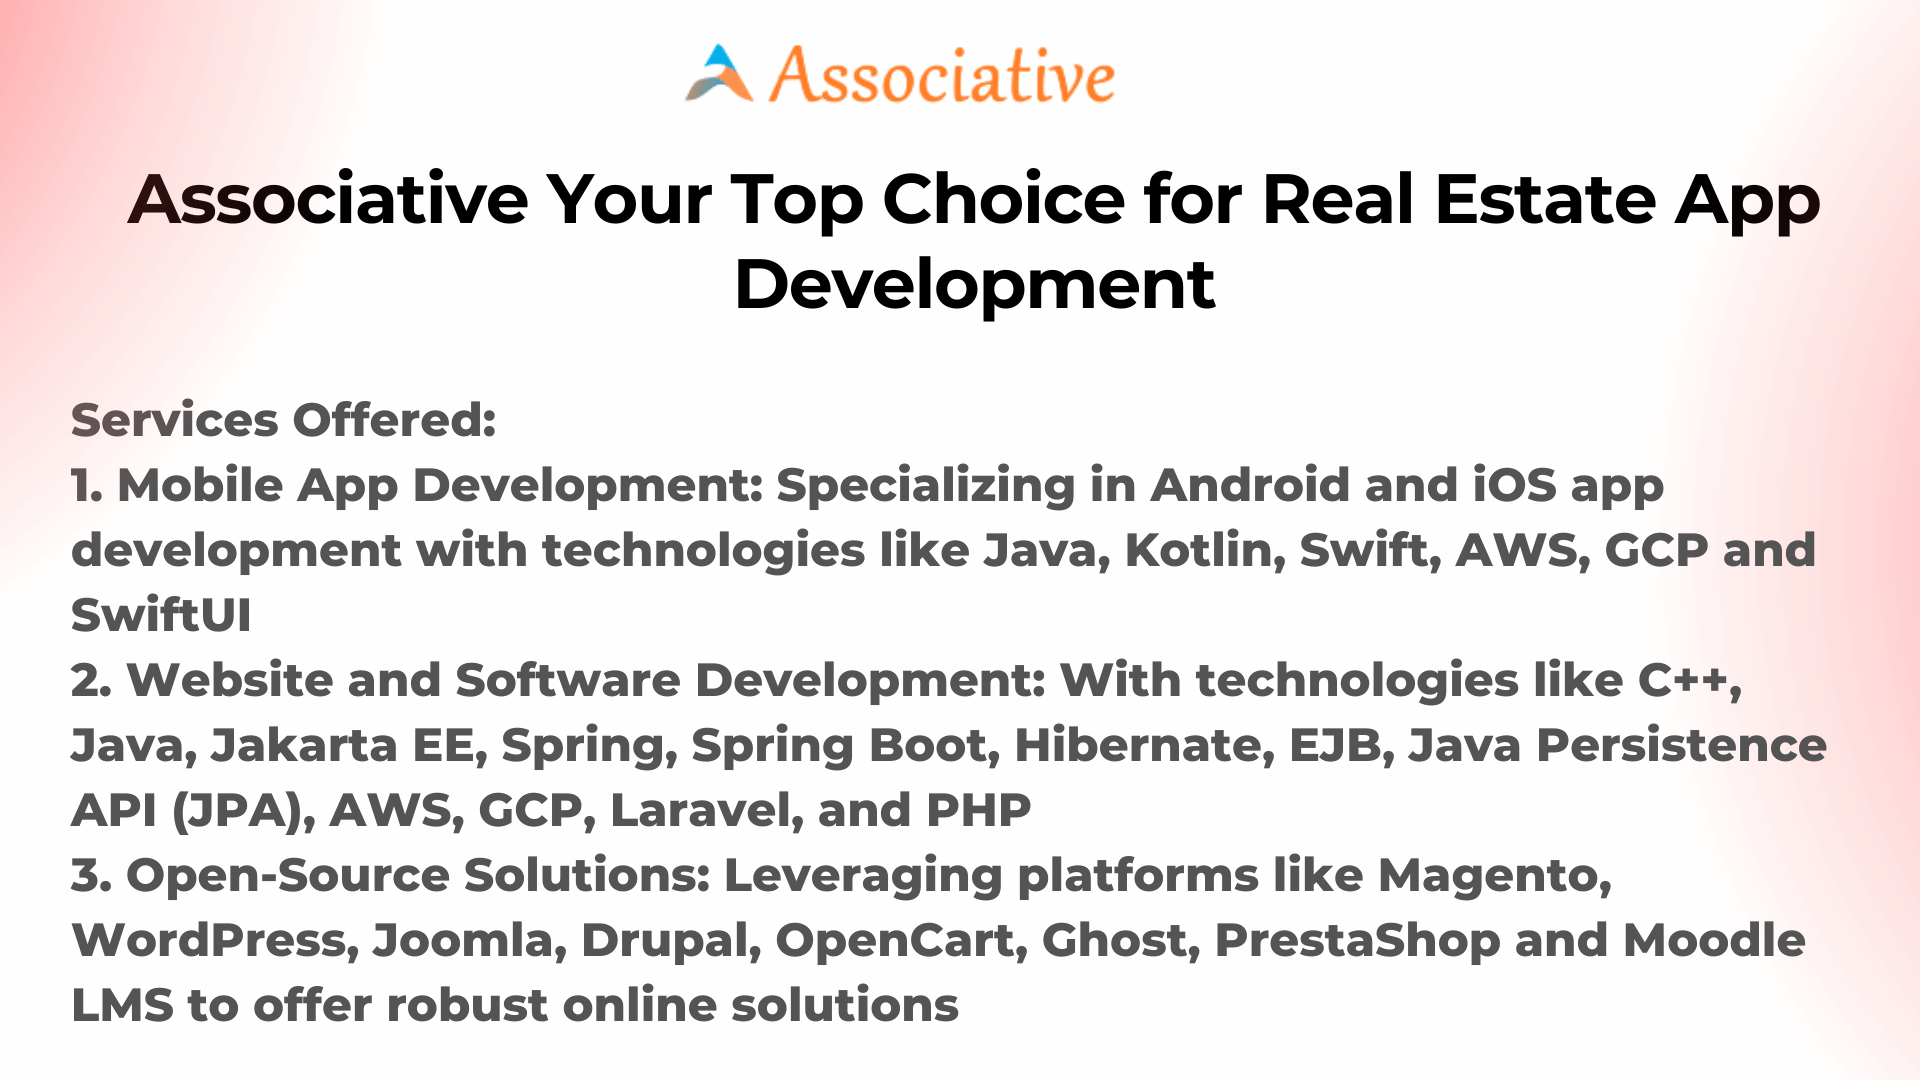 Associative Your Top Choice for Real Estate App Development